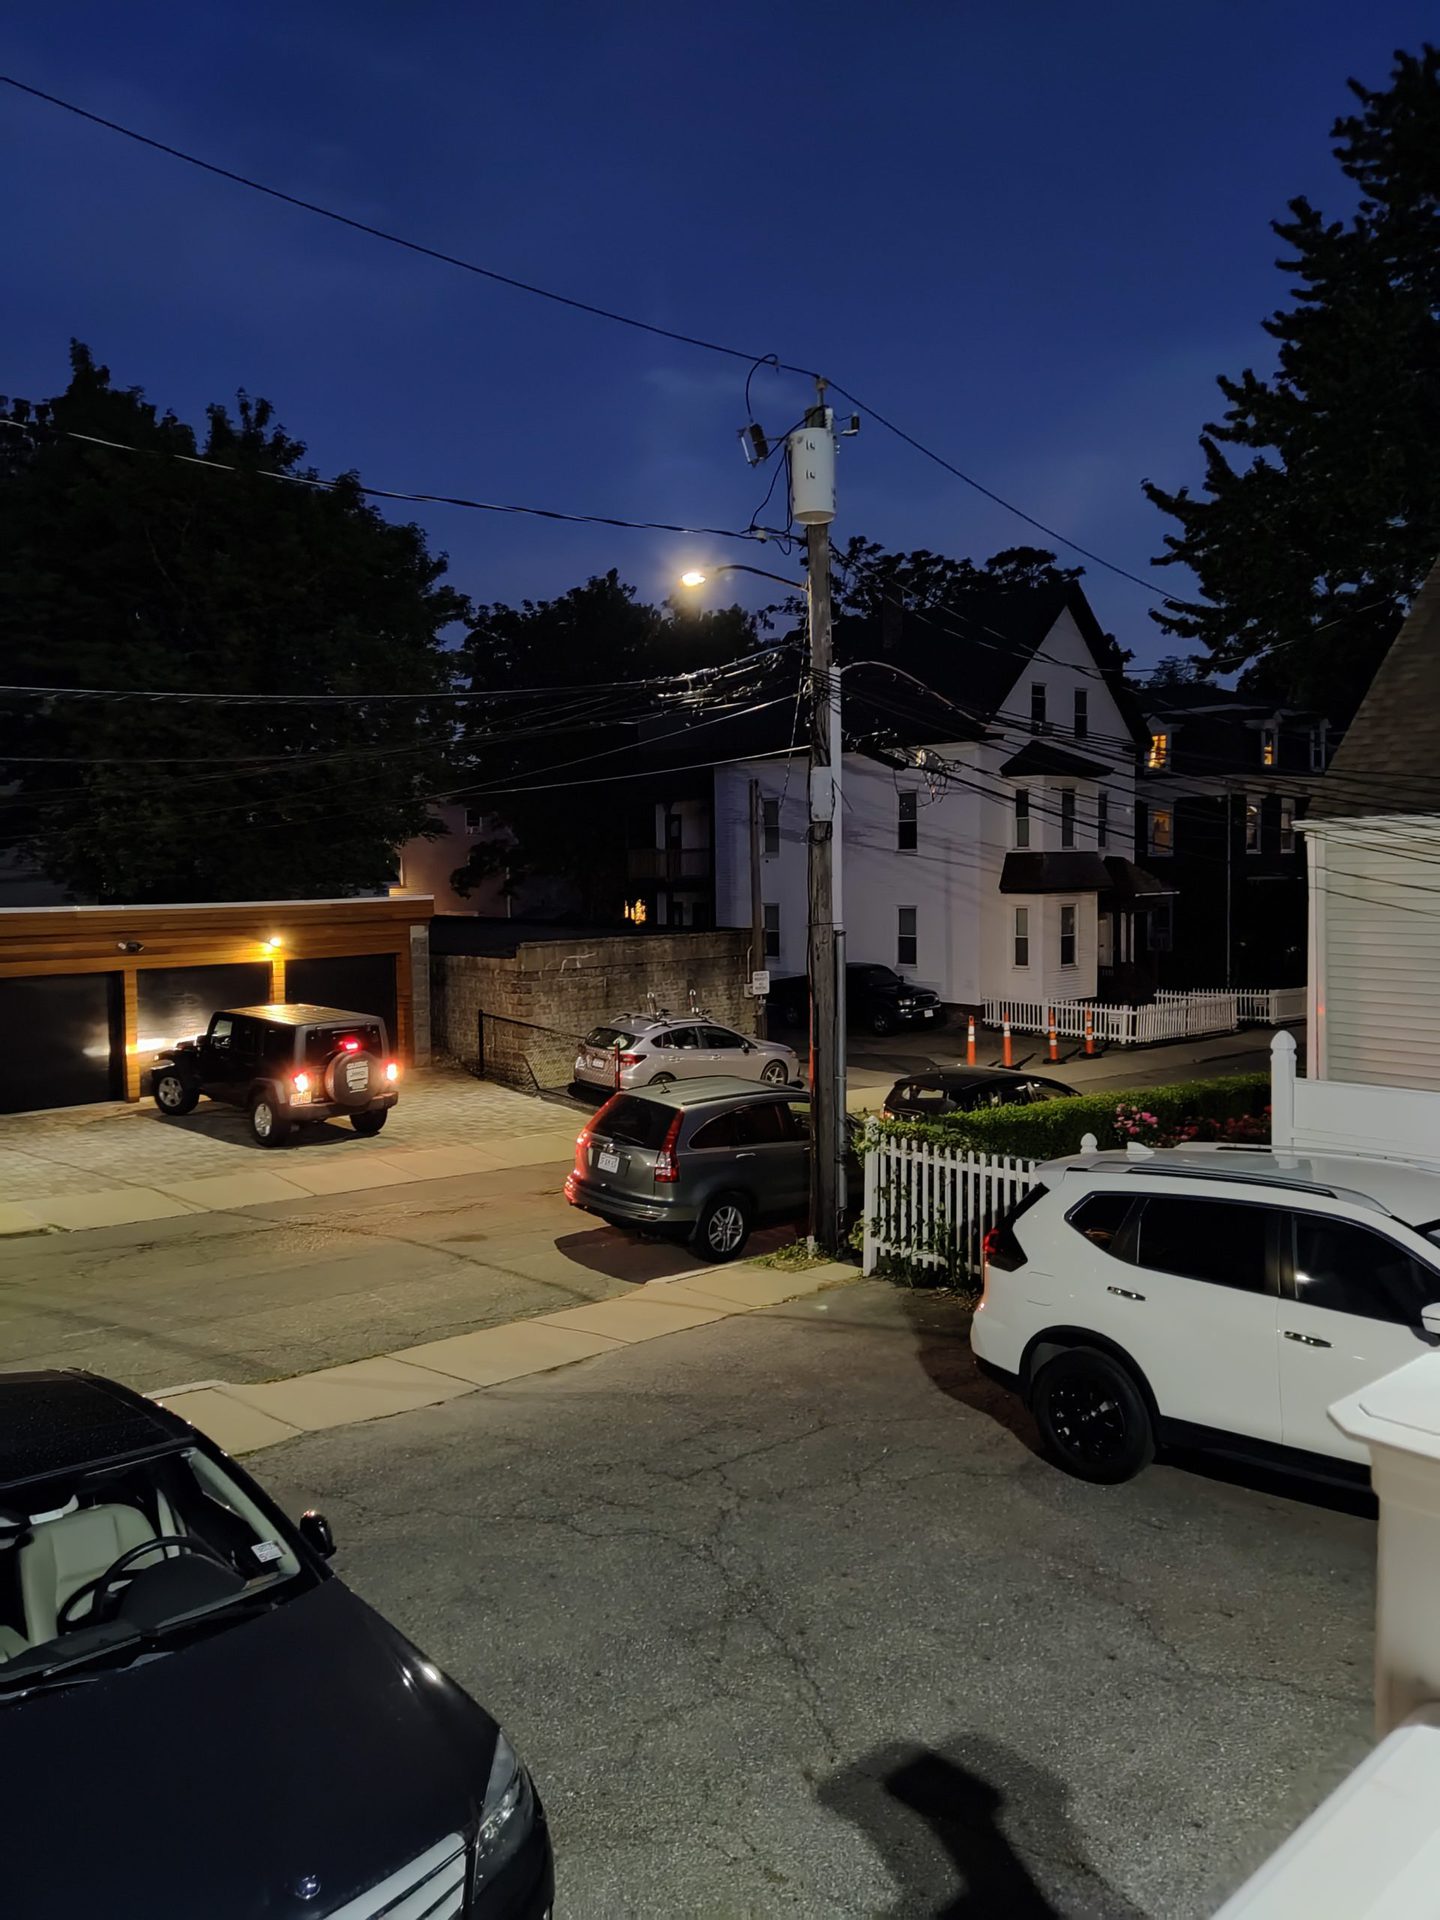 TCL 20 Pro 5G Camera nighttime shot of a street and cars parked, some with their lights on.